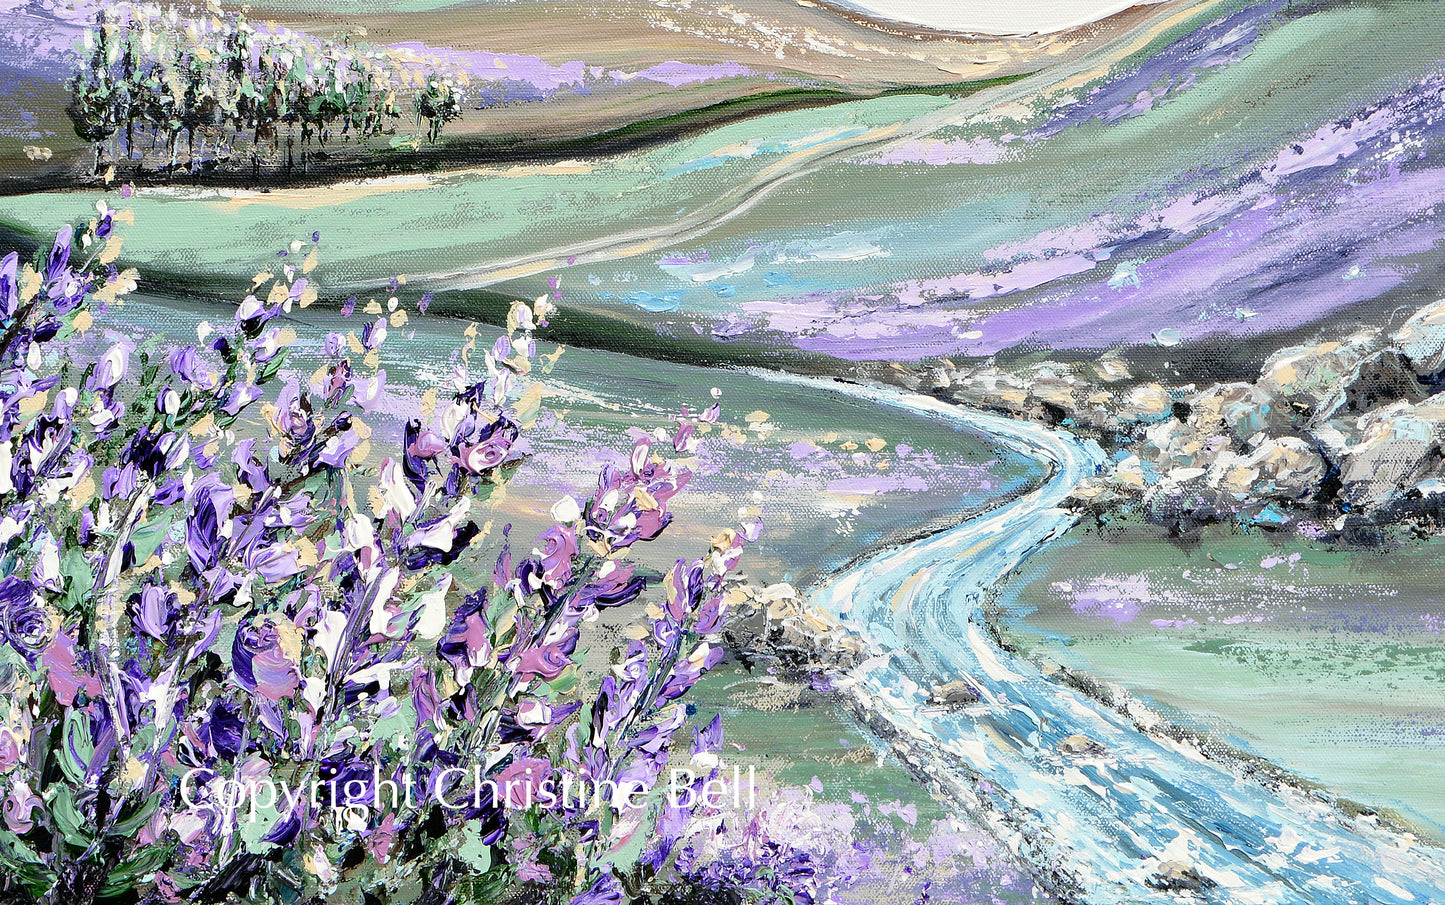 "Laced in Lavender" GICLEE PRINT Art Abstract Landscape Painting Lavender Field Flowers River Horizon